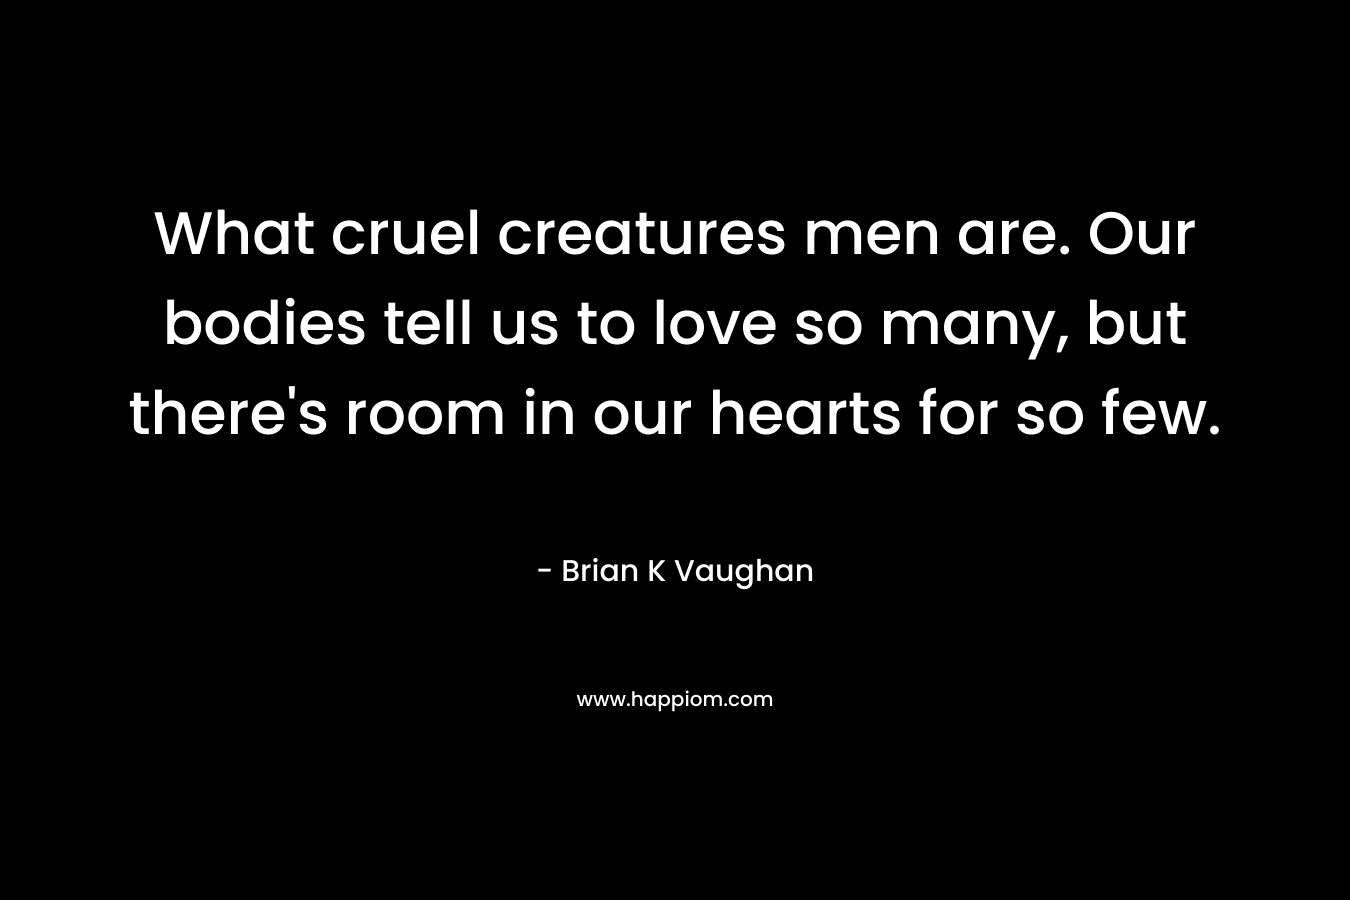 What cruel creatures men are. Our bodies tell us to love so many, but there's room in our hearts for so few.